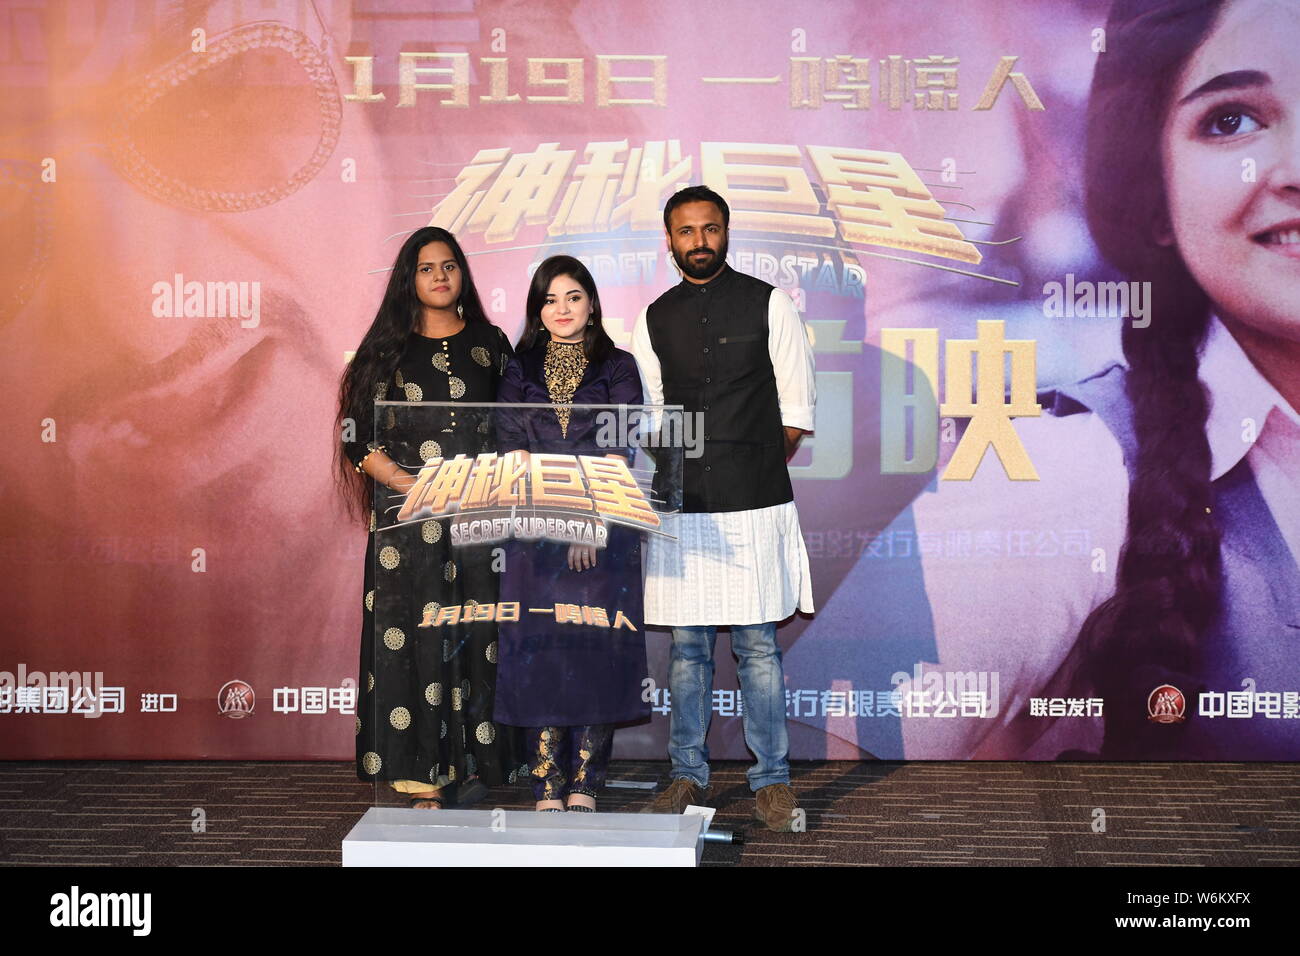 (From left) Indian singer Meghna Mishra, film child actress Zaira Wasim and director Advait Chandan attend a premiere event for the new movie 'Secret Stock Photo